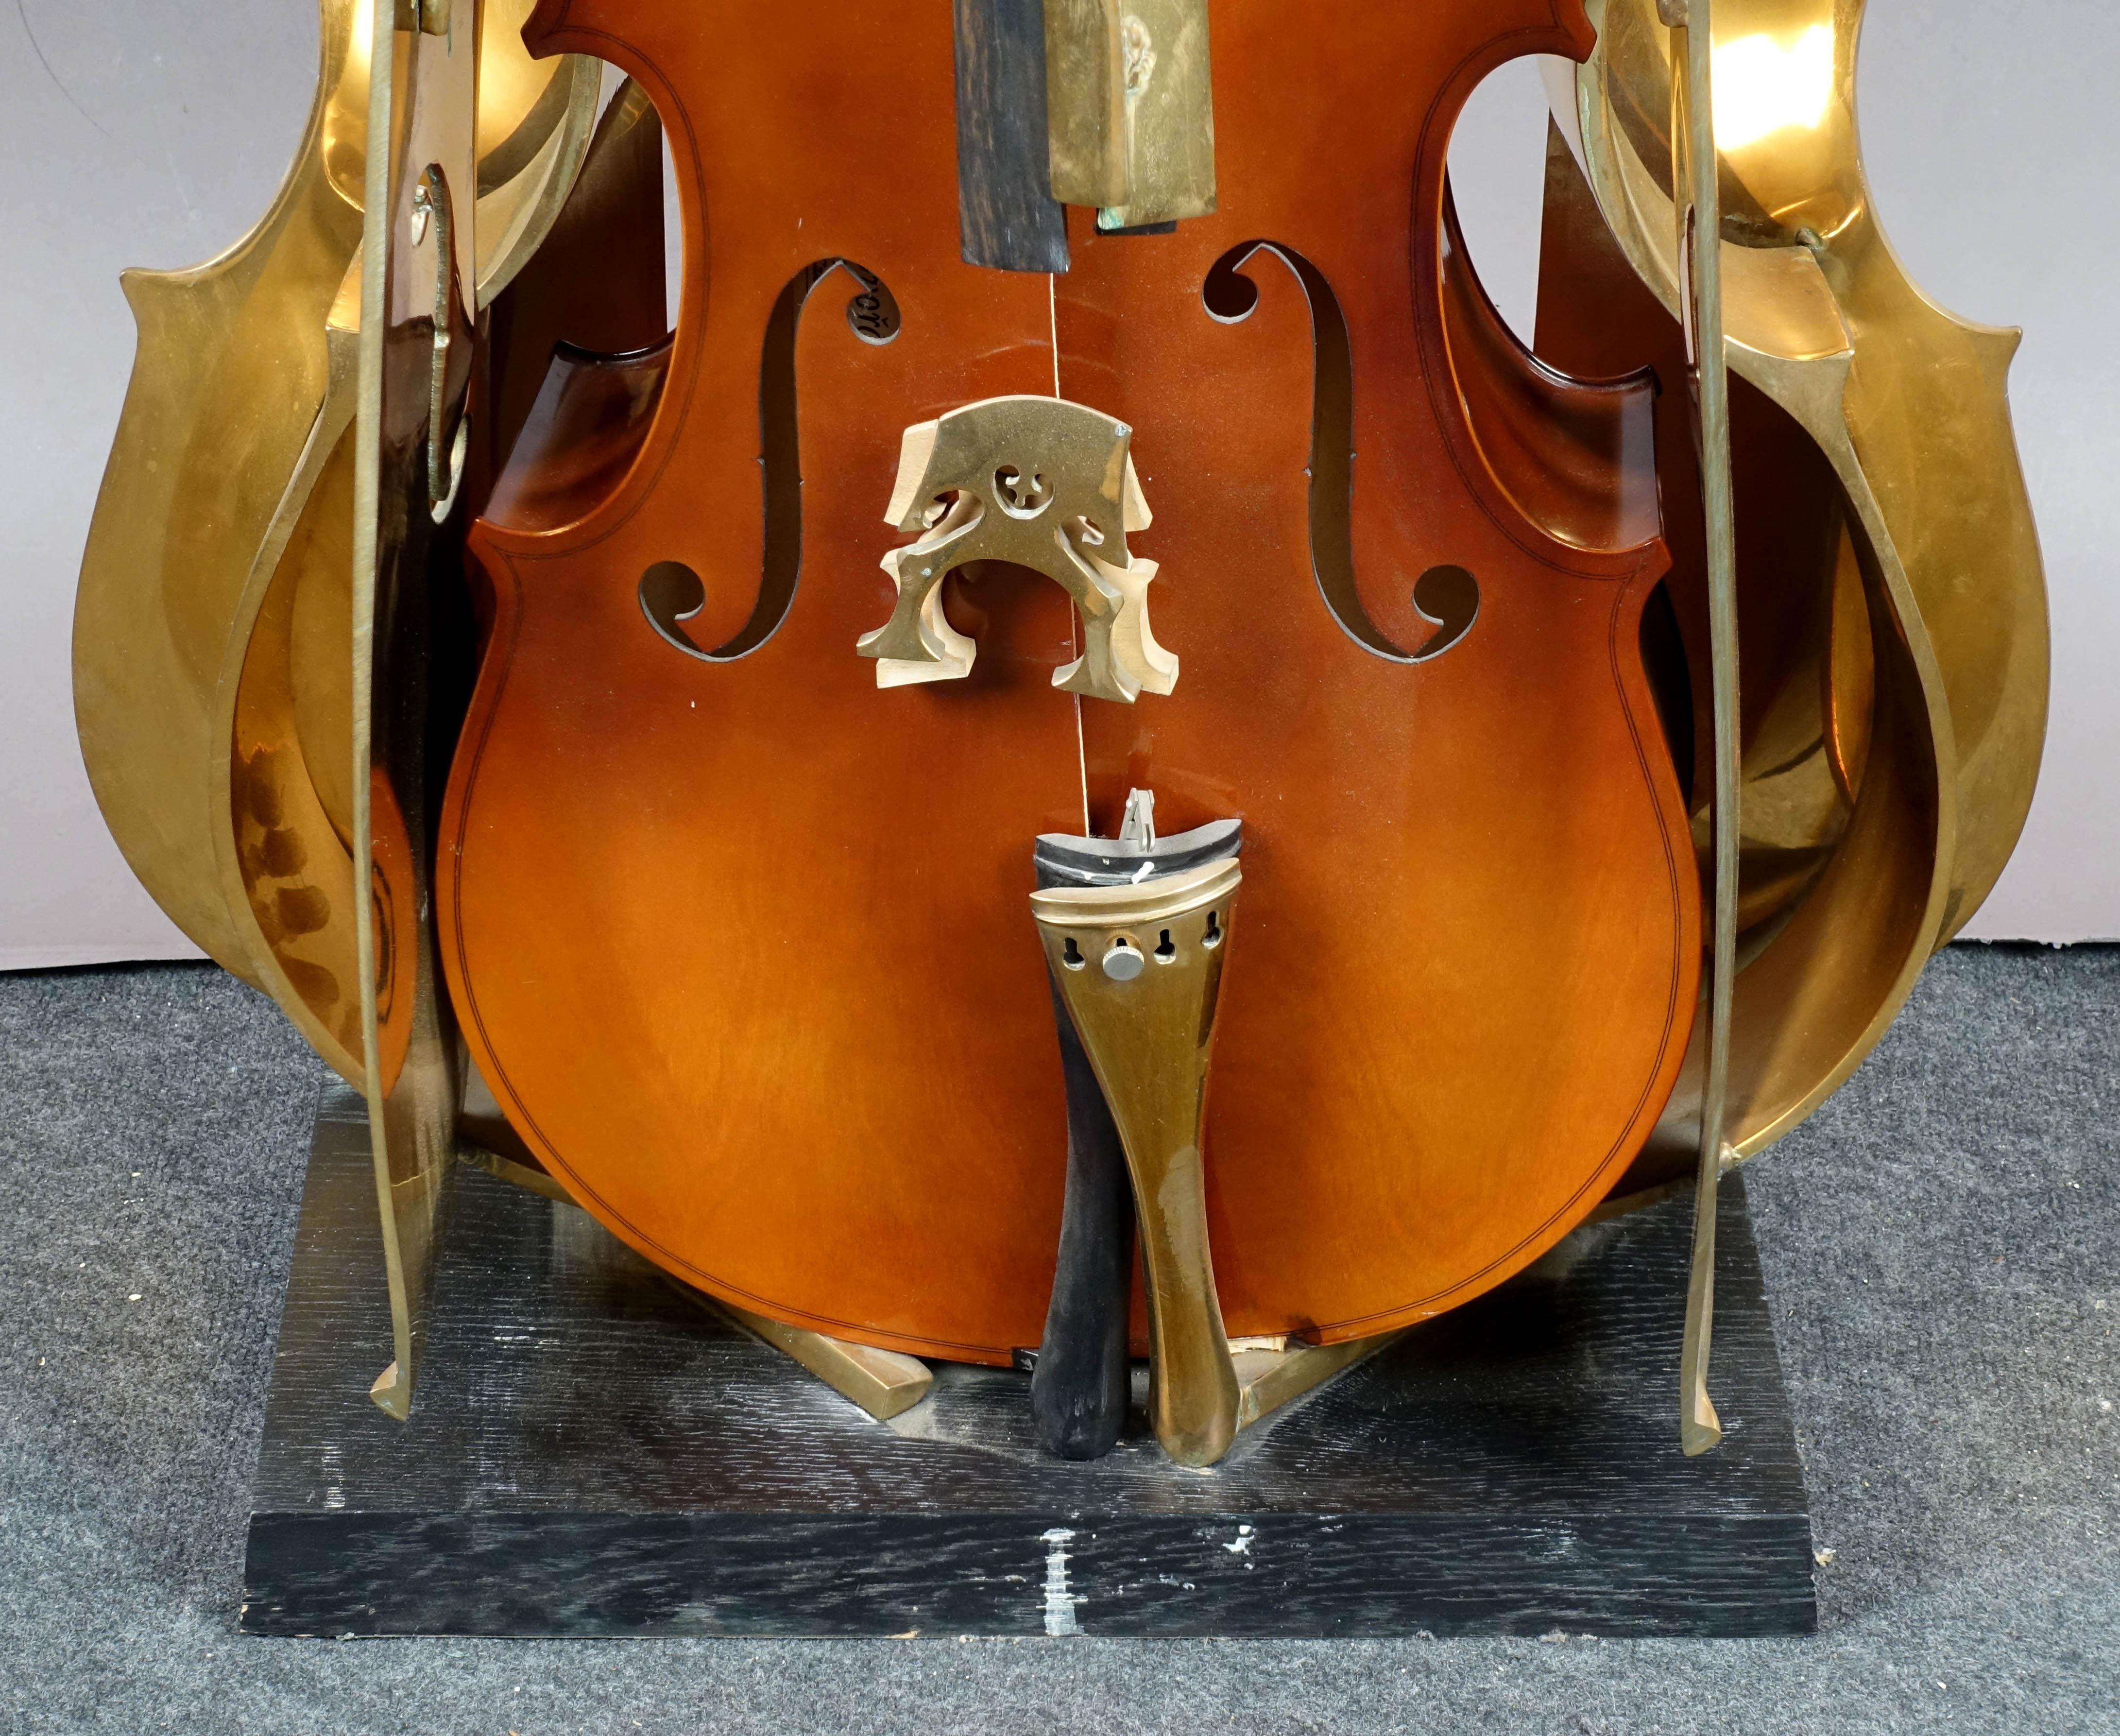 Beautiful Cello bronze and wood sculpture by the Important artist ARMAN.
signed and numbered '6/8'.
This work is recorded in the Arman Studio Archives New York under number: APA# 8310.02.004.